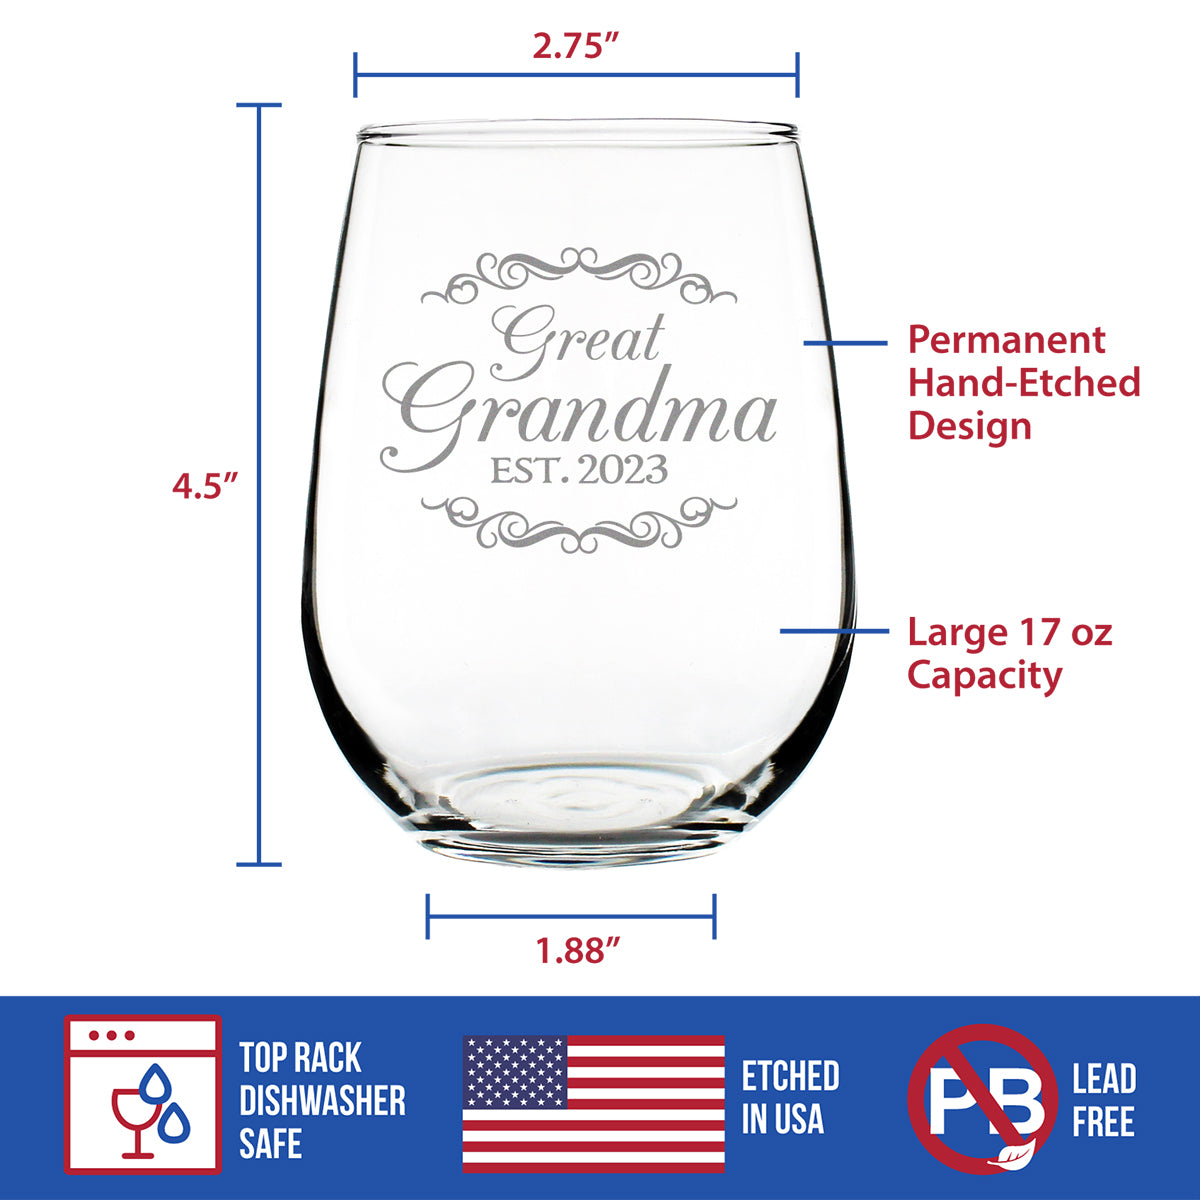 Great Grandma Est 2023 - New Great Grandmother Stemless Wine Glass Gift for First Time Great Grandparents - Decorative 17 Oz Large Glasses